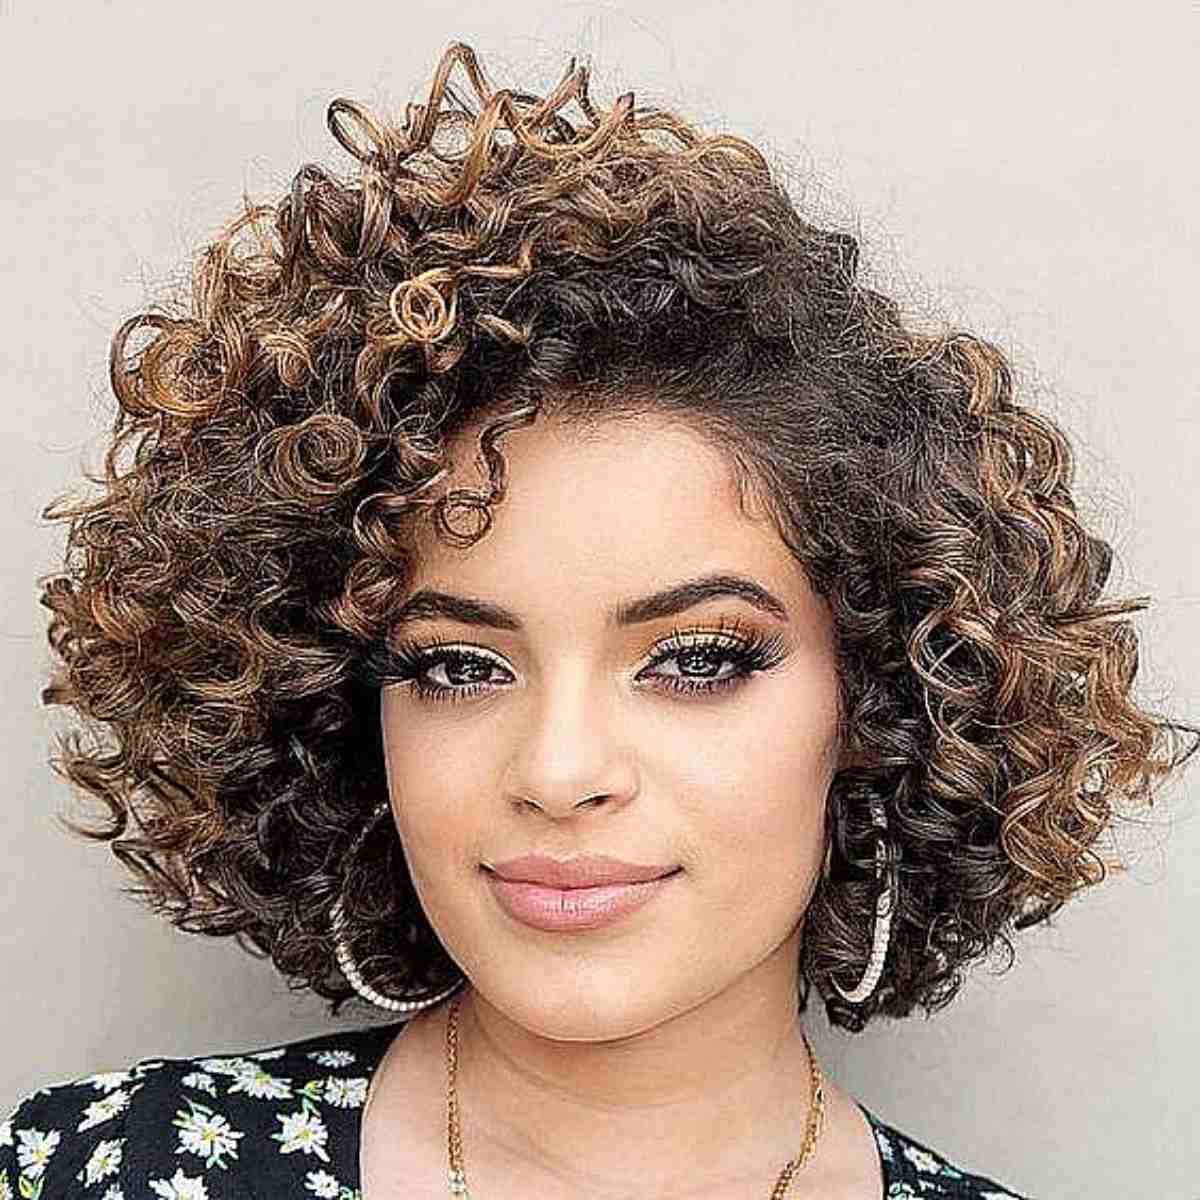 Curly bob with side-swept styling, mixing caramel and espresso tones, with a round cut that balances angular features.